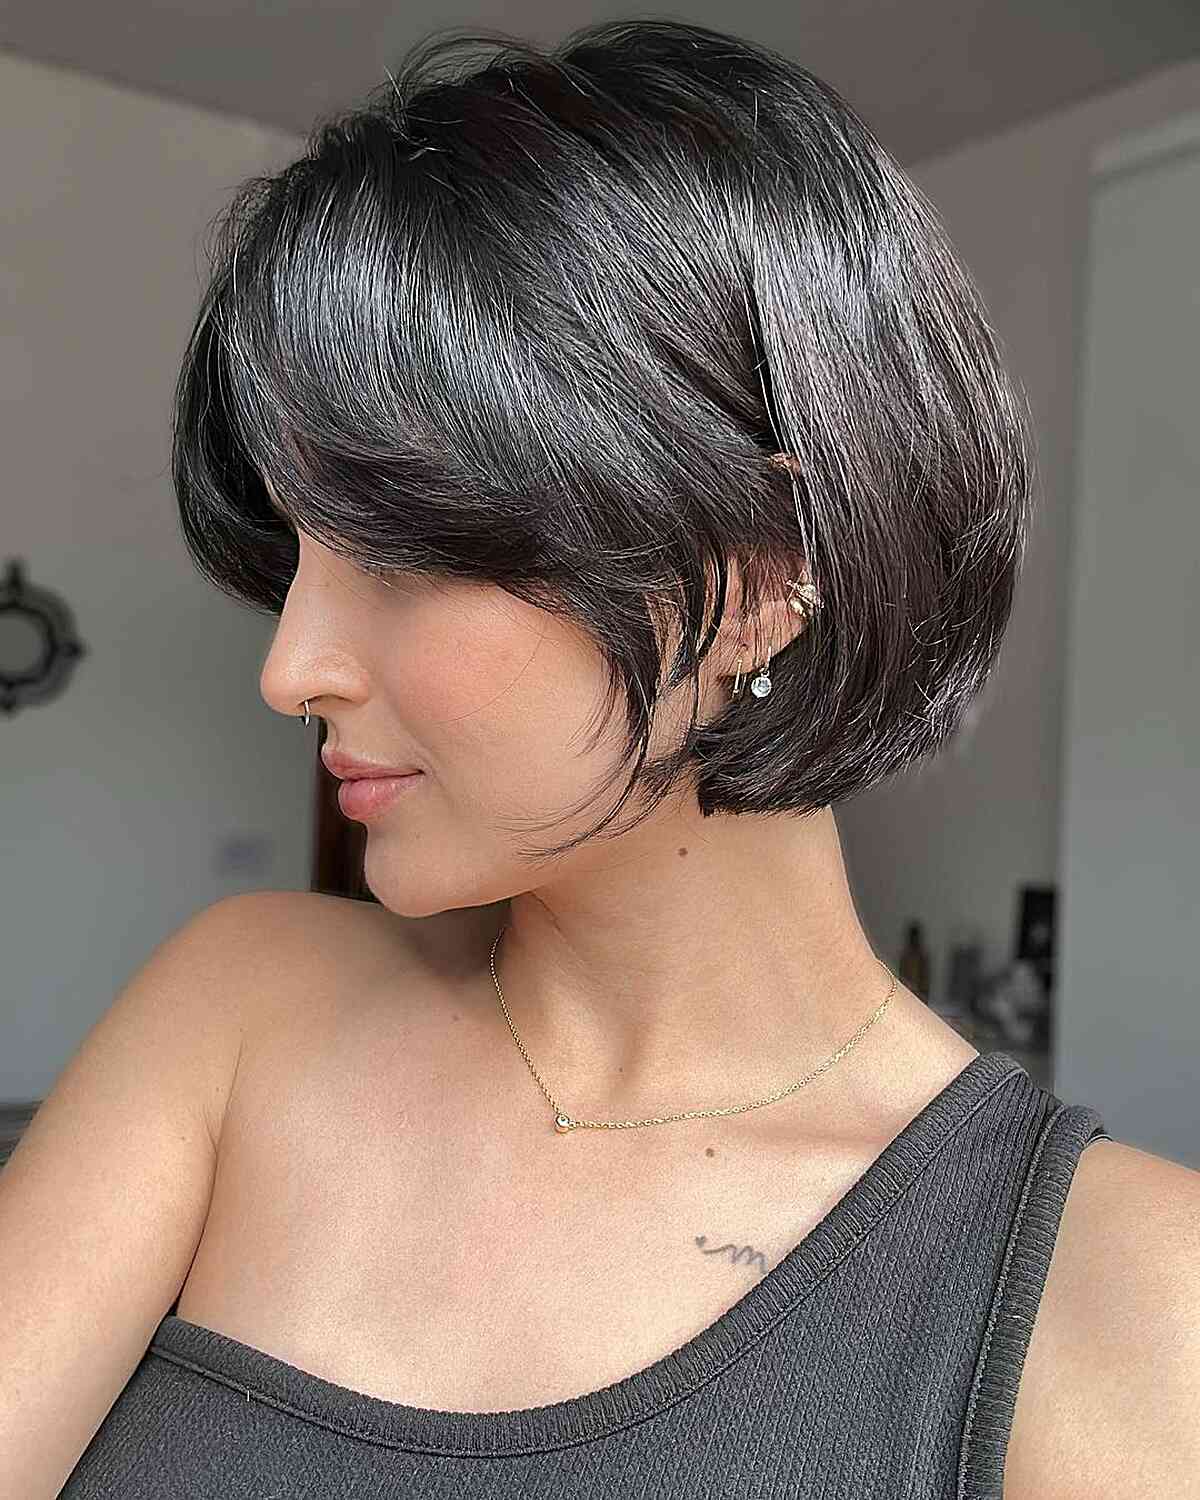 Short Jaw-Length Bob Cut for Very Dark Hair and for ladies with oval faces